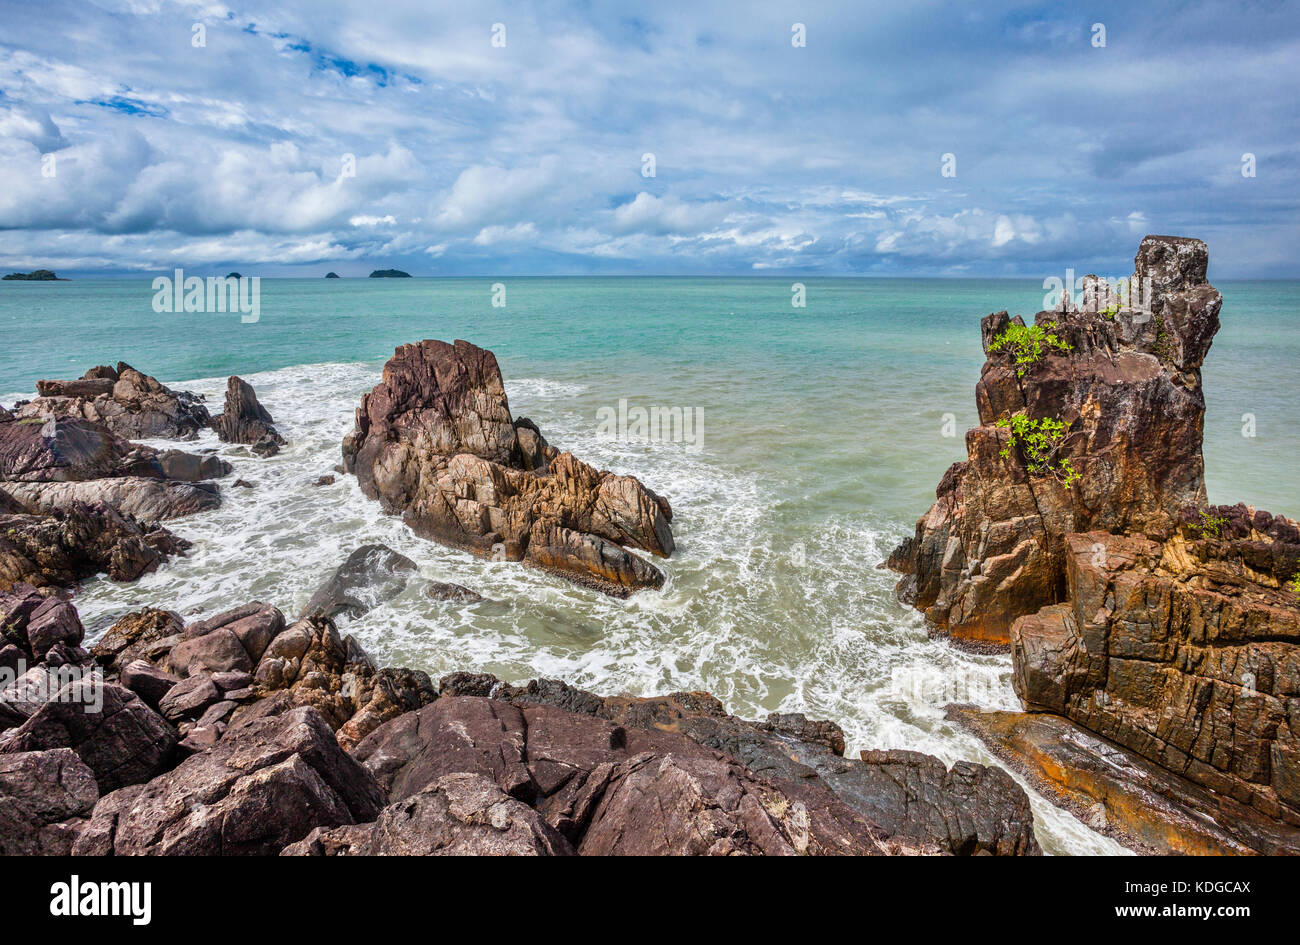 Thailand, Trat Province, tropical island of Koh Chang in the Gulf of Thailand, rocky promontory Cape Chai Chet on the west coast north of Ao Klong Phr Stock Photo